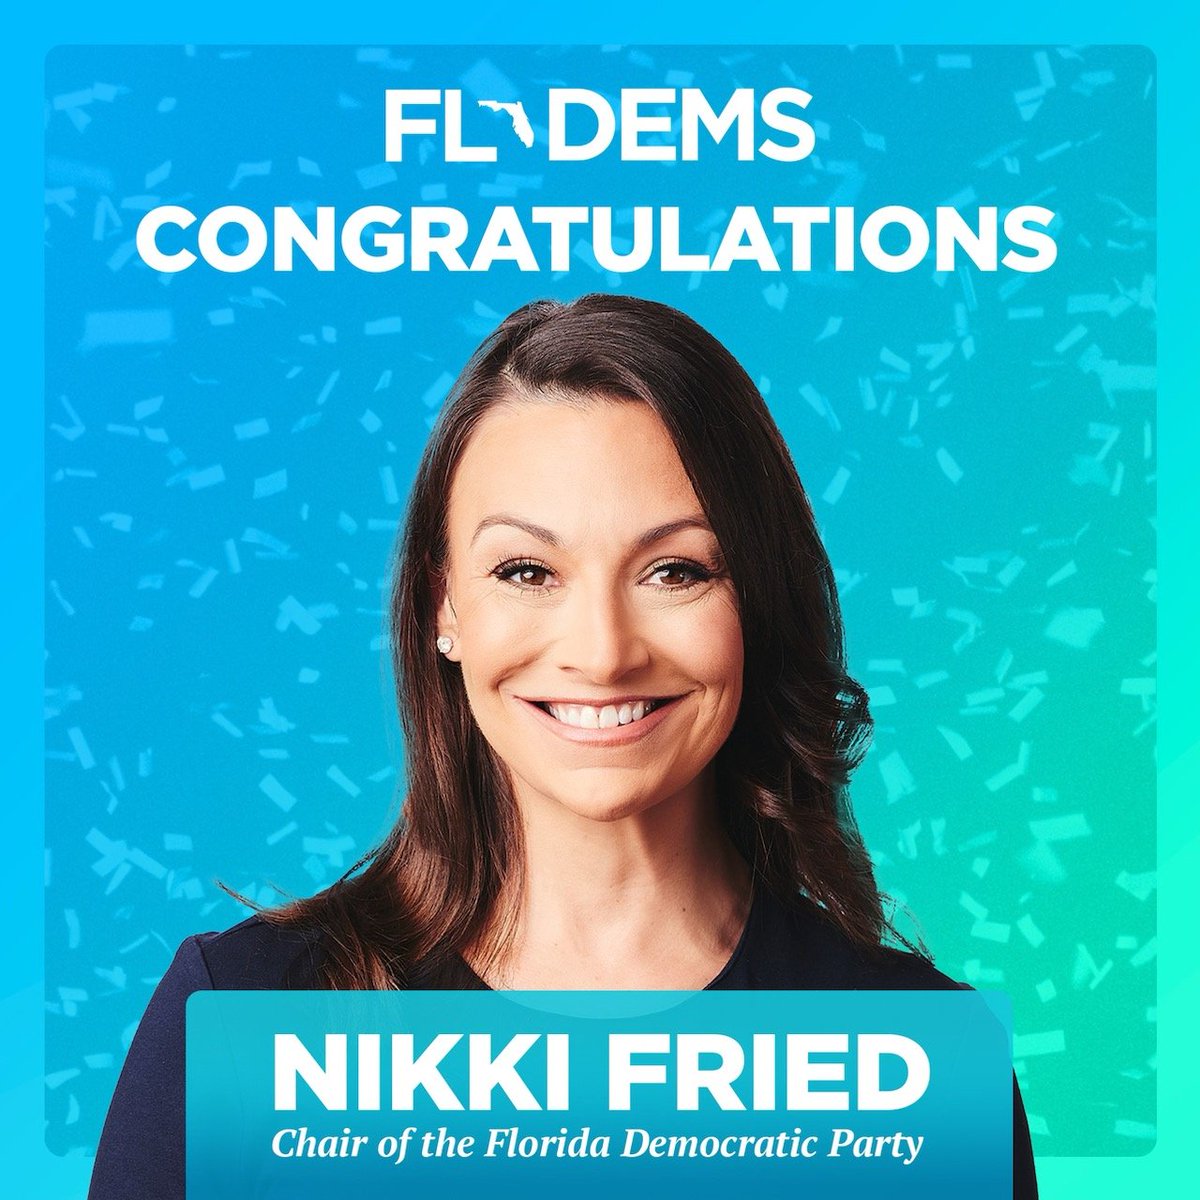 The Florida Democratic Party congratulates @NikkiFried on being elected to lead our party as the new Chair. We look forward to working together to elect Democrats up and down the ballot to deliver for Floridians.